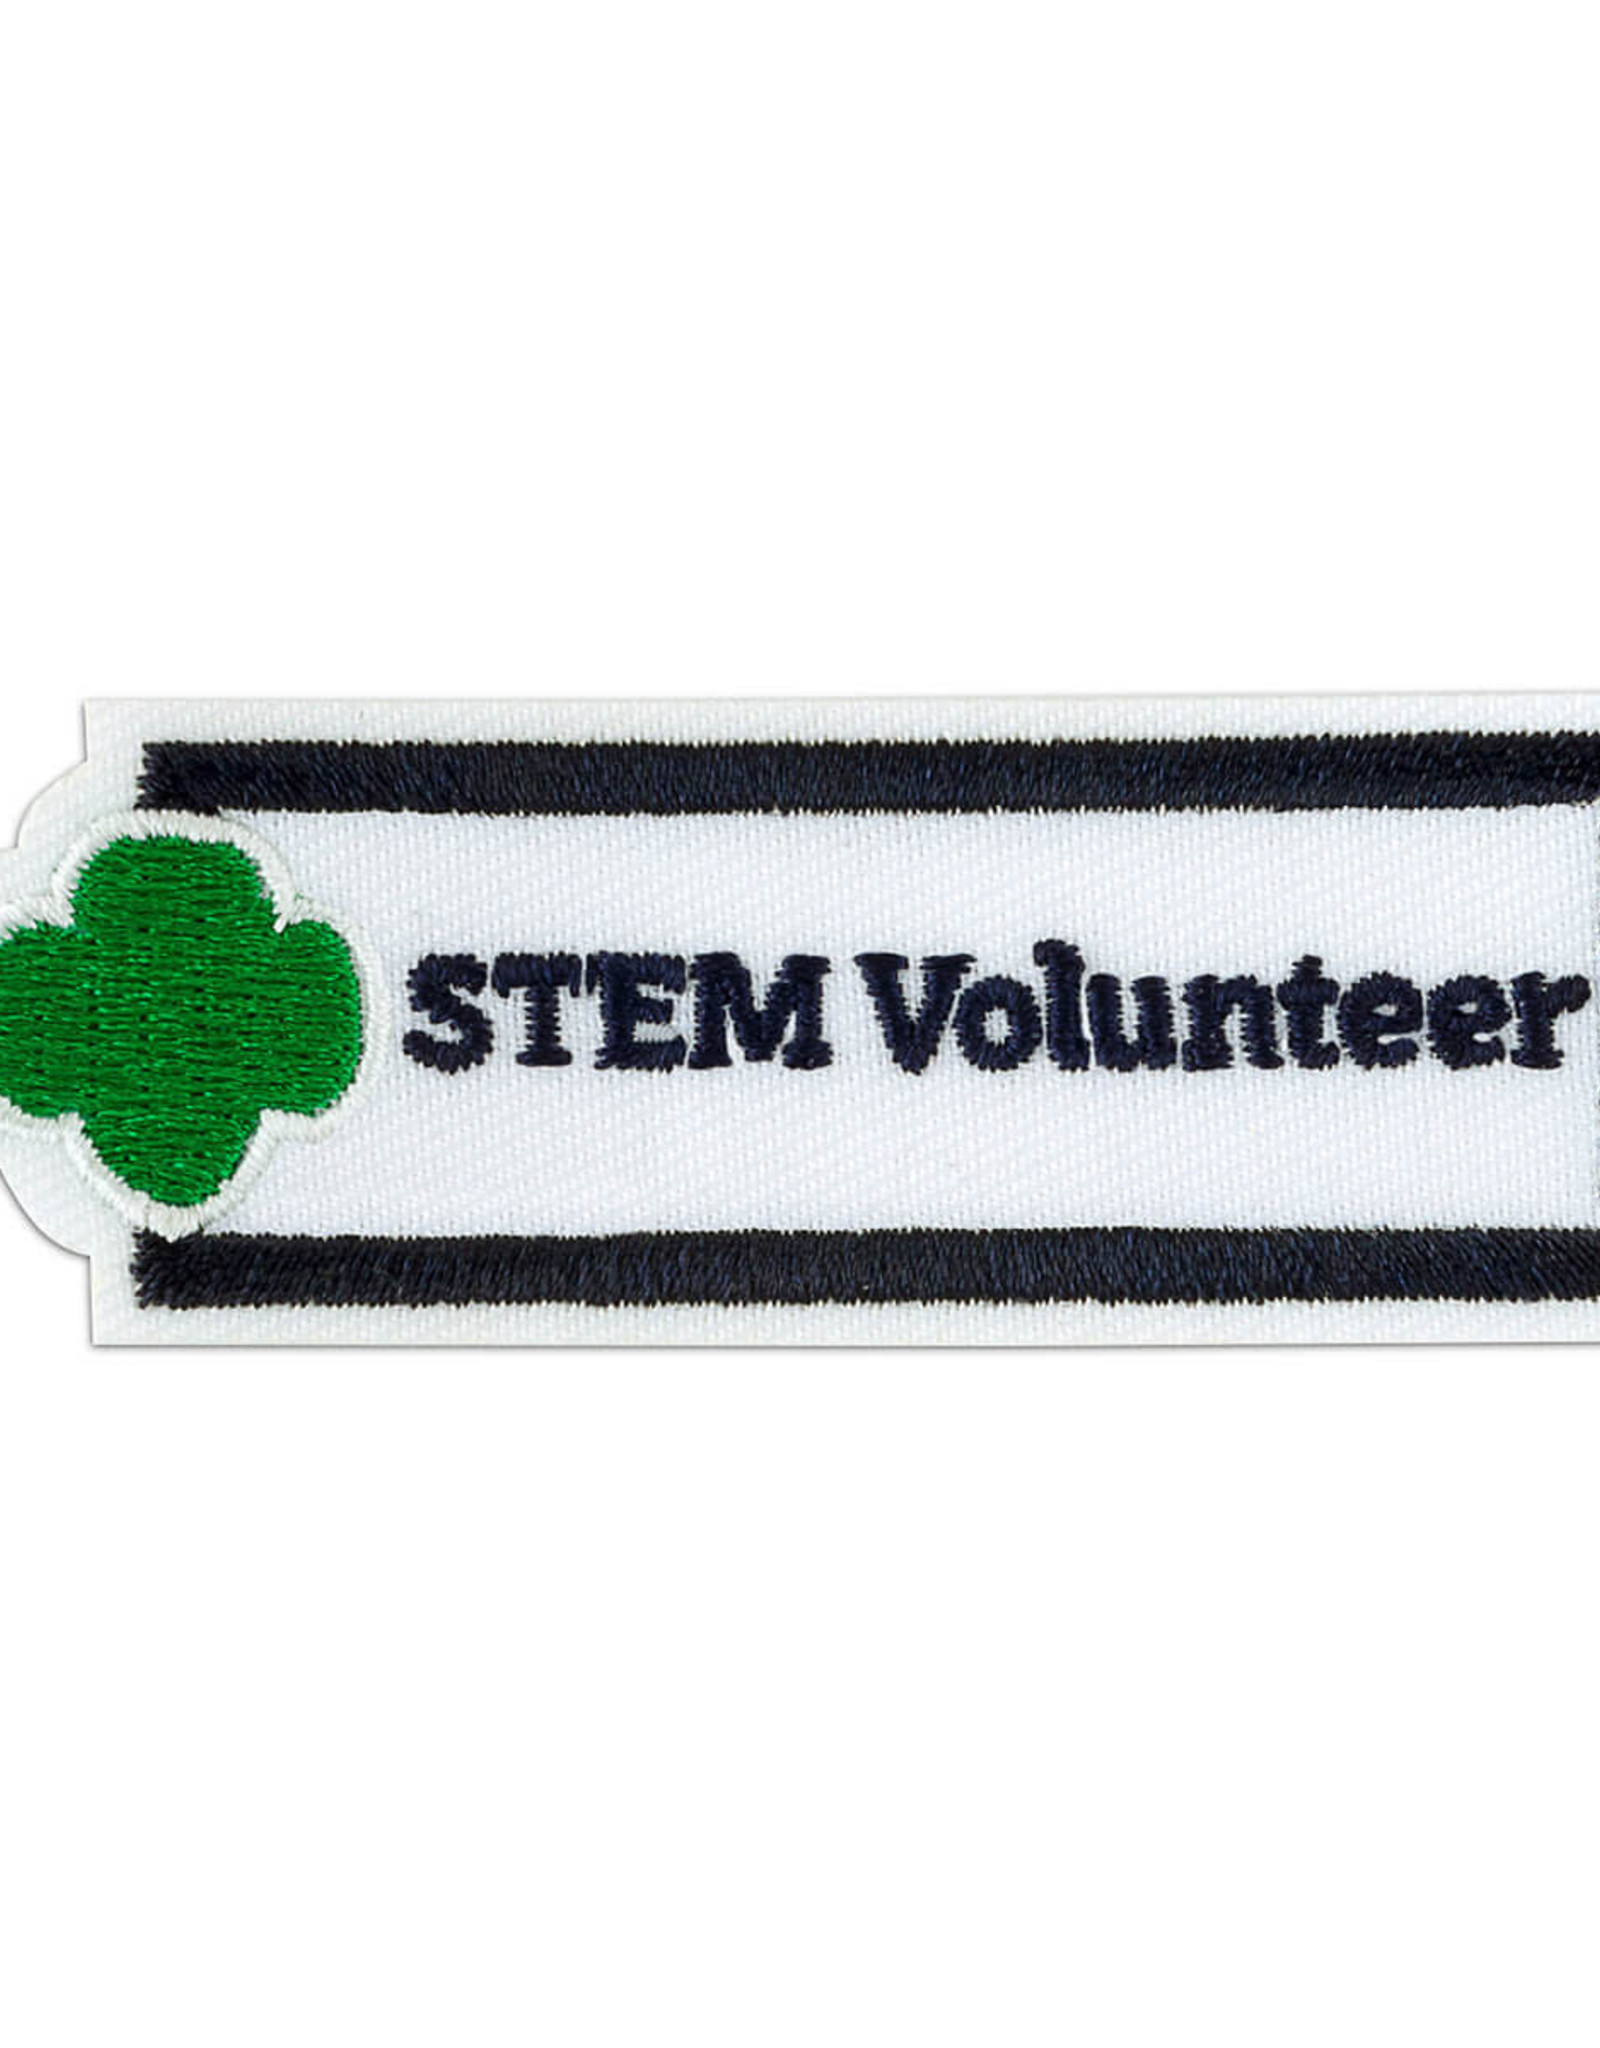 GIRL SCOUTS OF THE USA STEM Volunteer Adult Achievement Patch